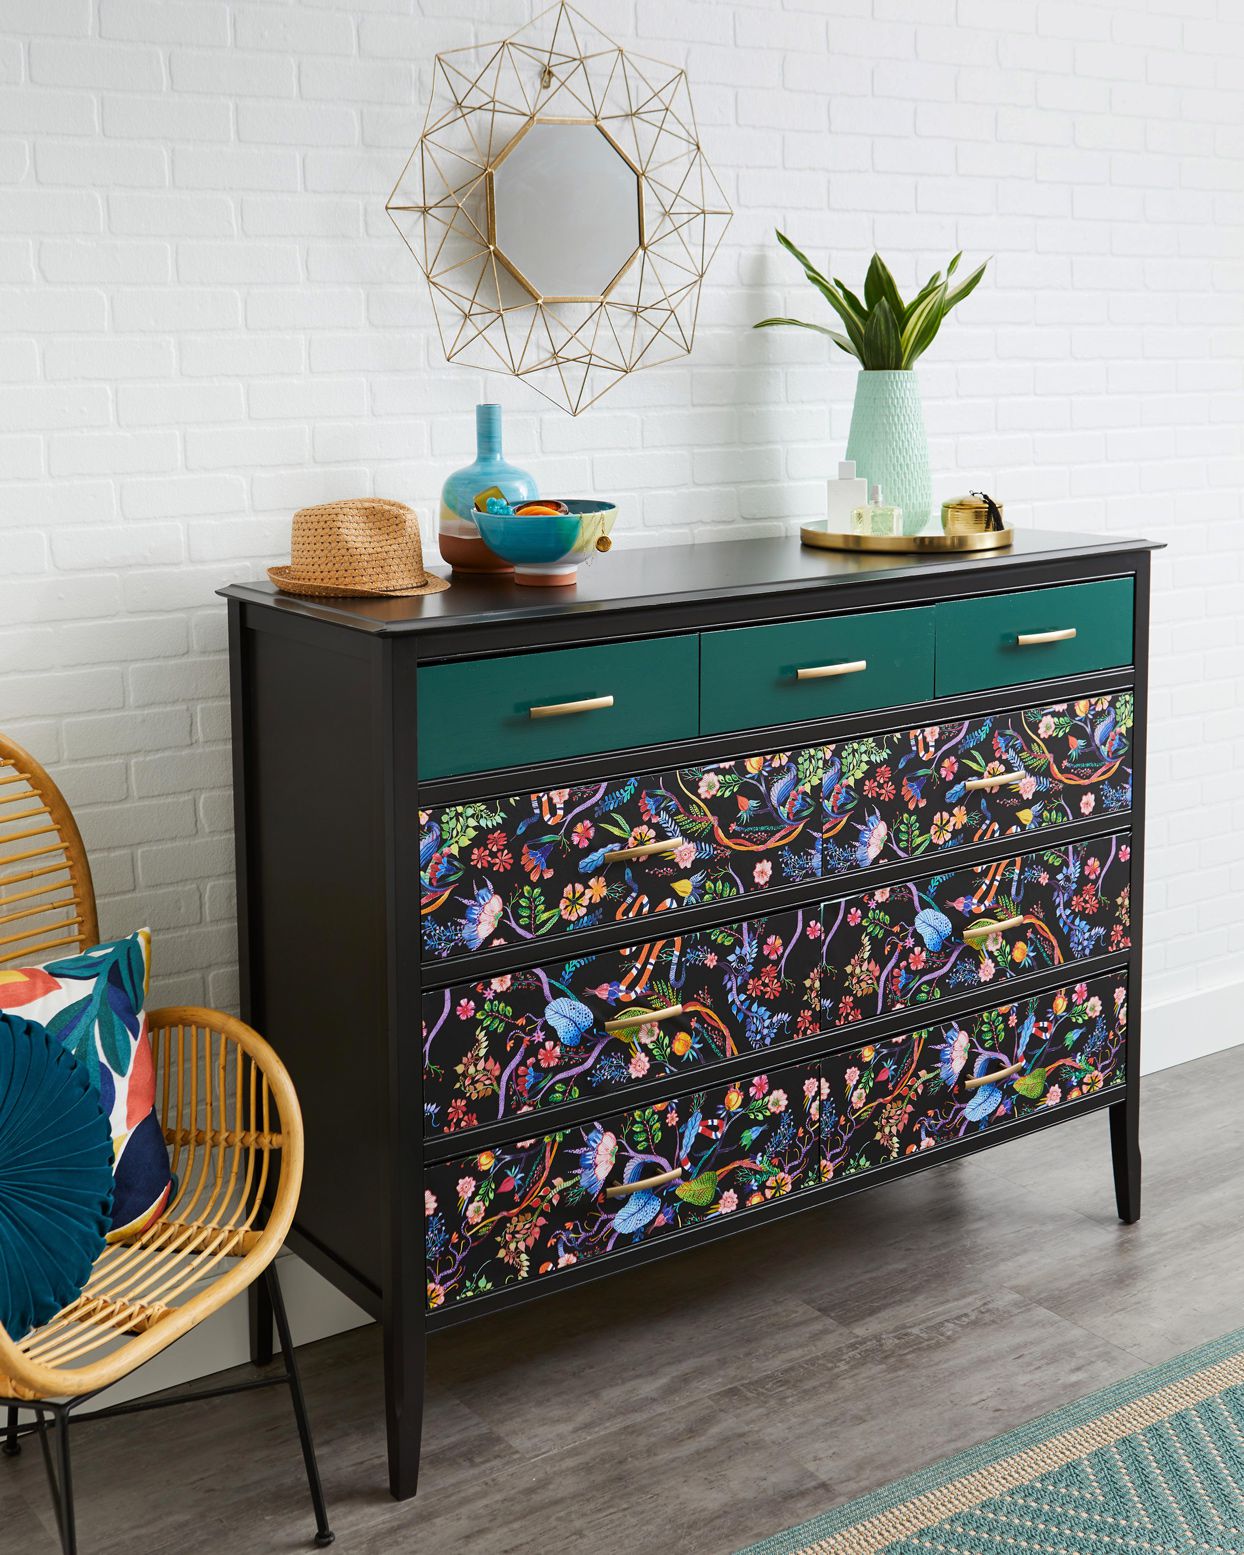 Diy furniture projects to personalize your home on a budget